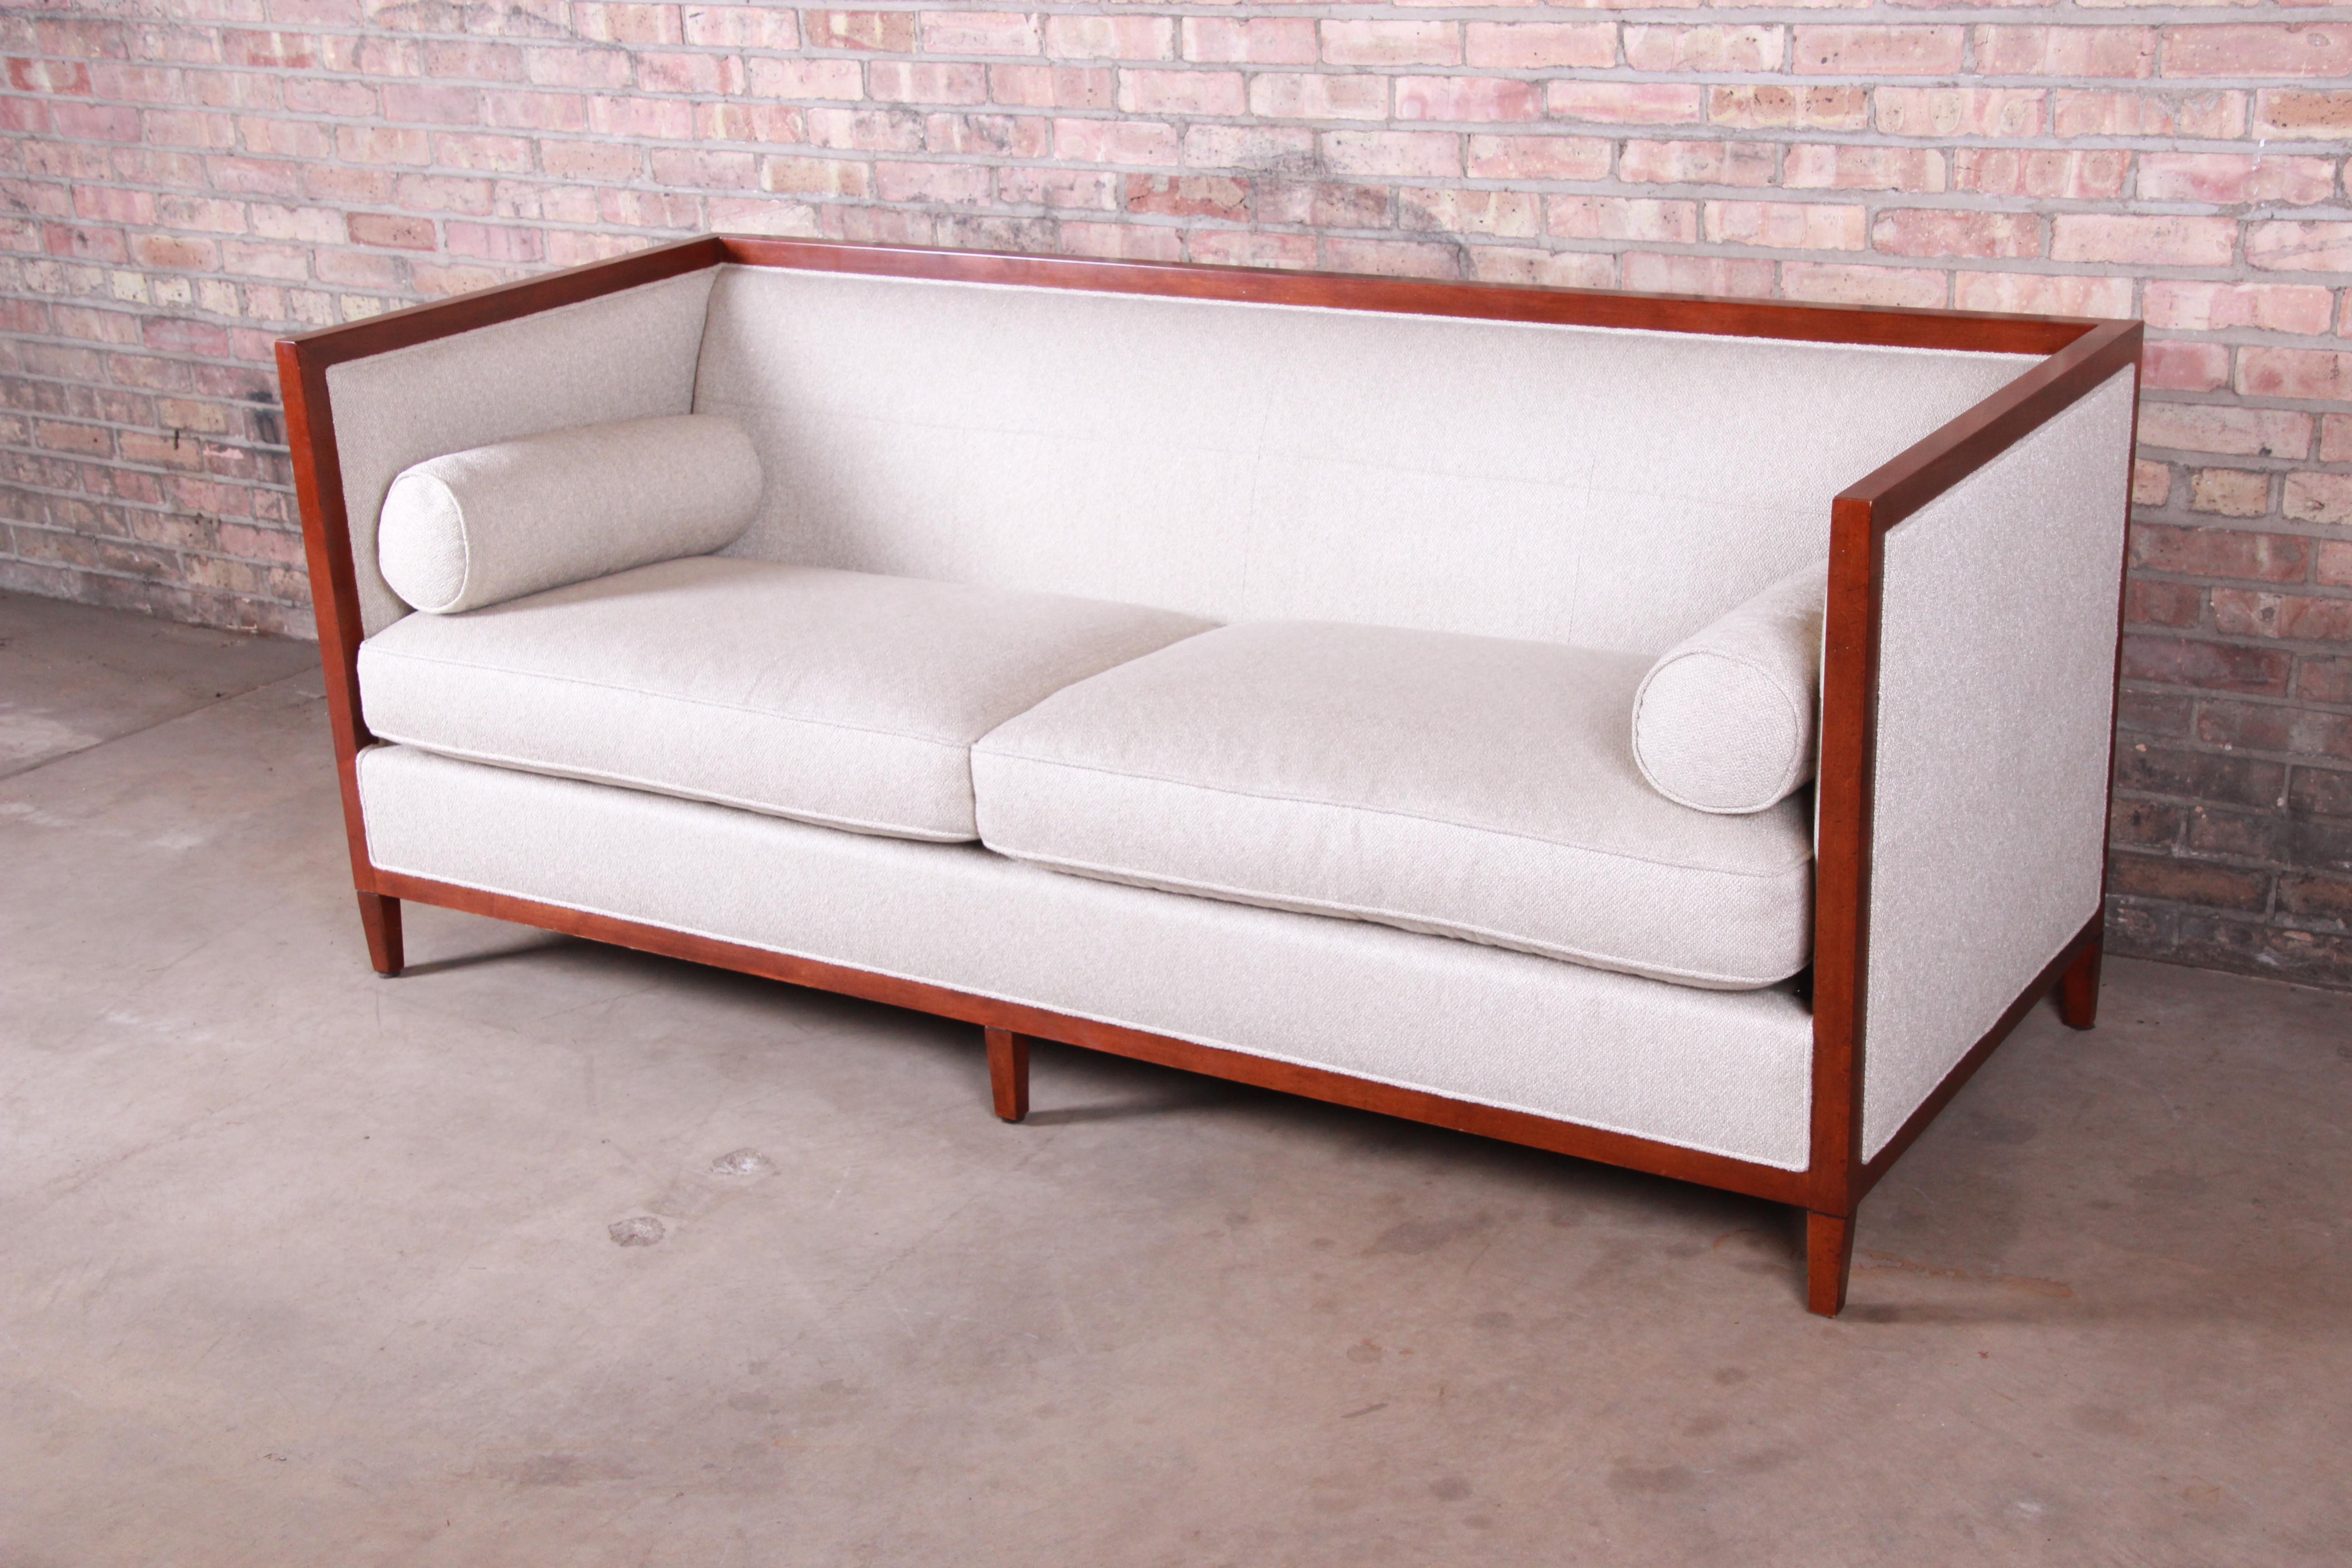 Modern Barbara Barry for Baker Contemporary Down-Filled Sofa